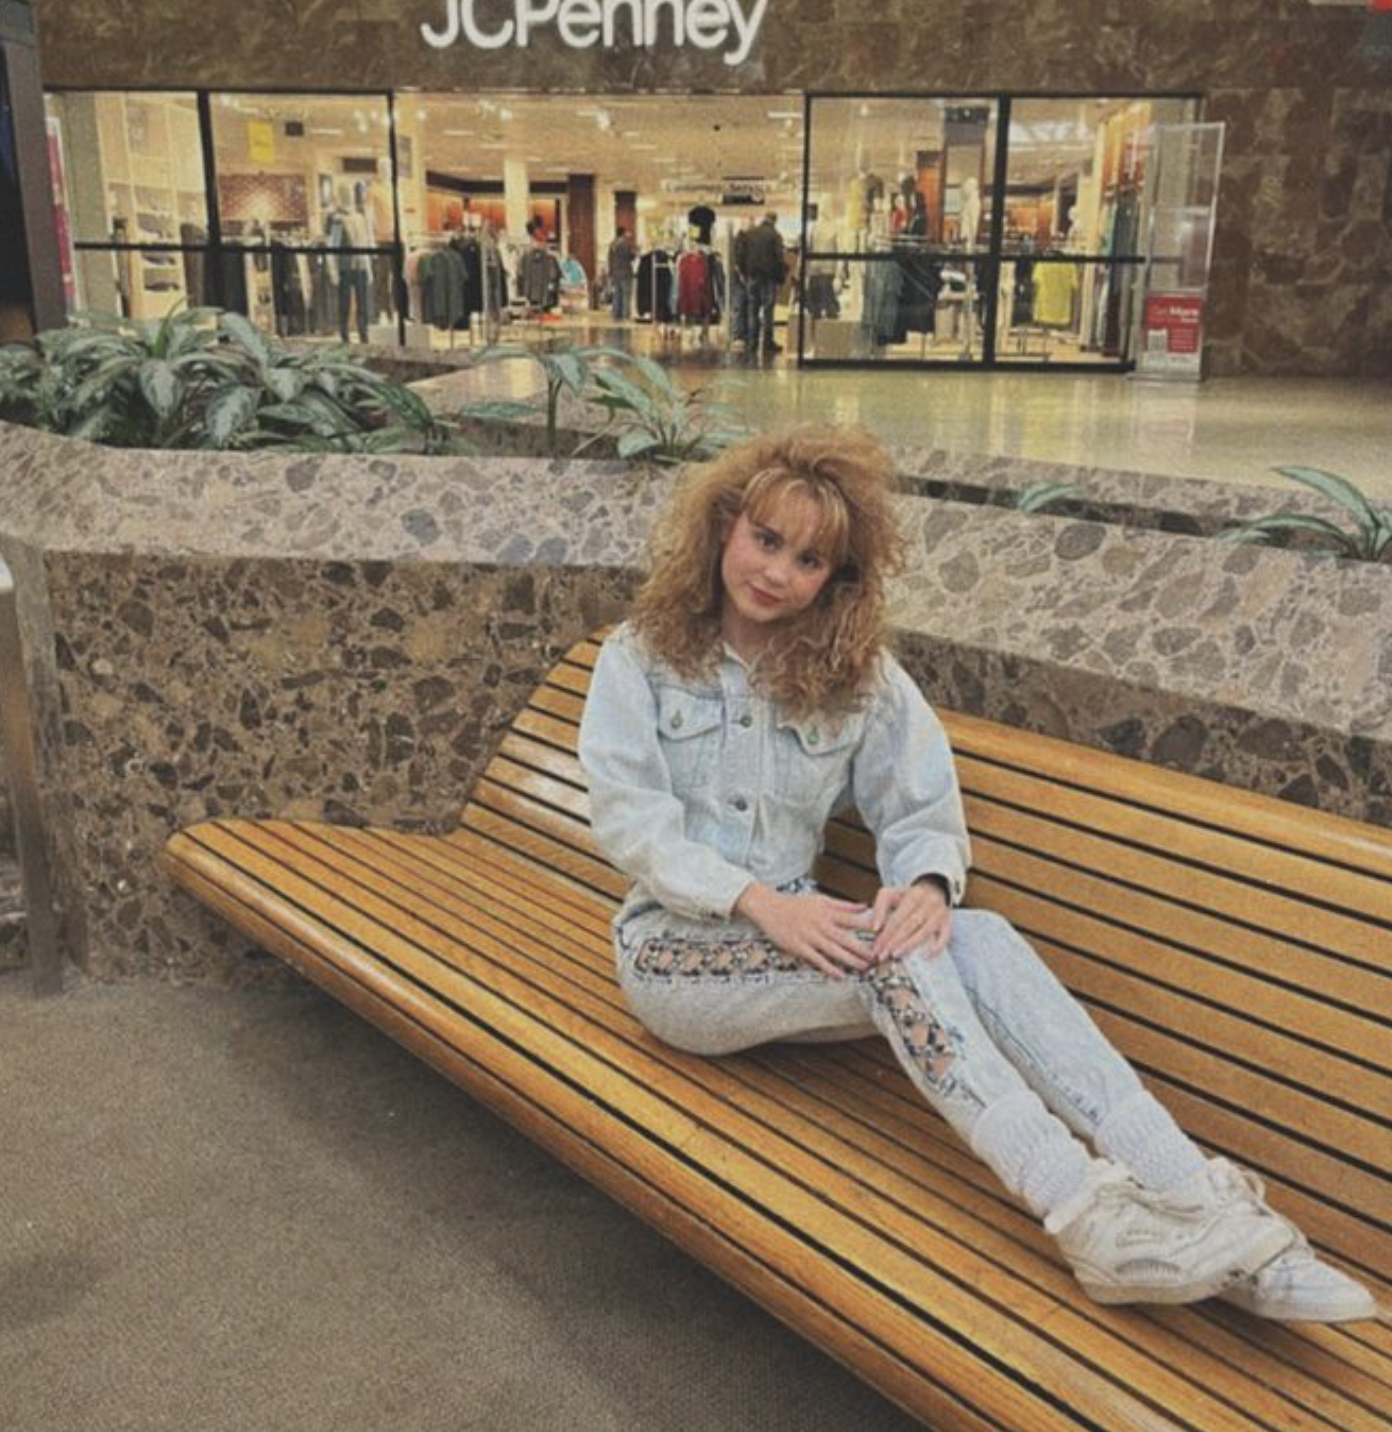 A person with curly hair sits on a wooden bench in front of a JCPenney store inside a mall. They wear a jean jacket, light-colored pants, and sneakers